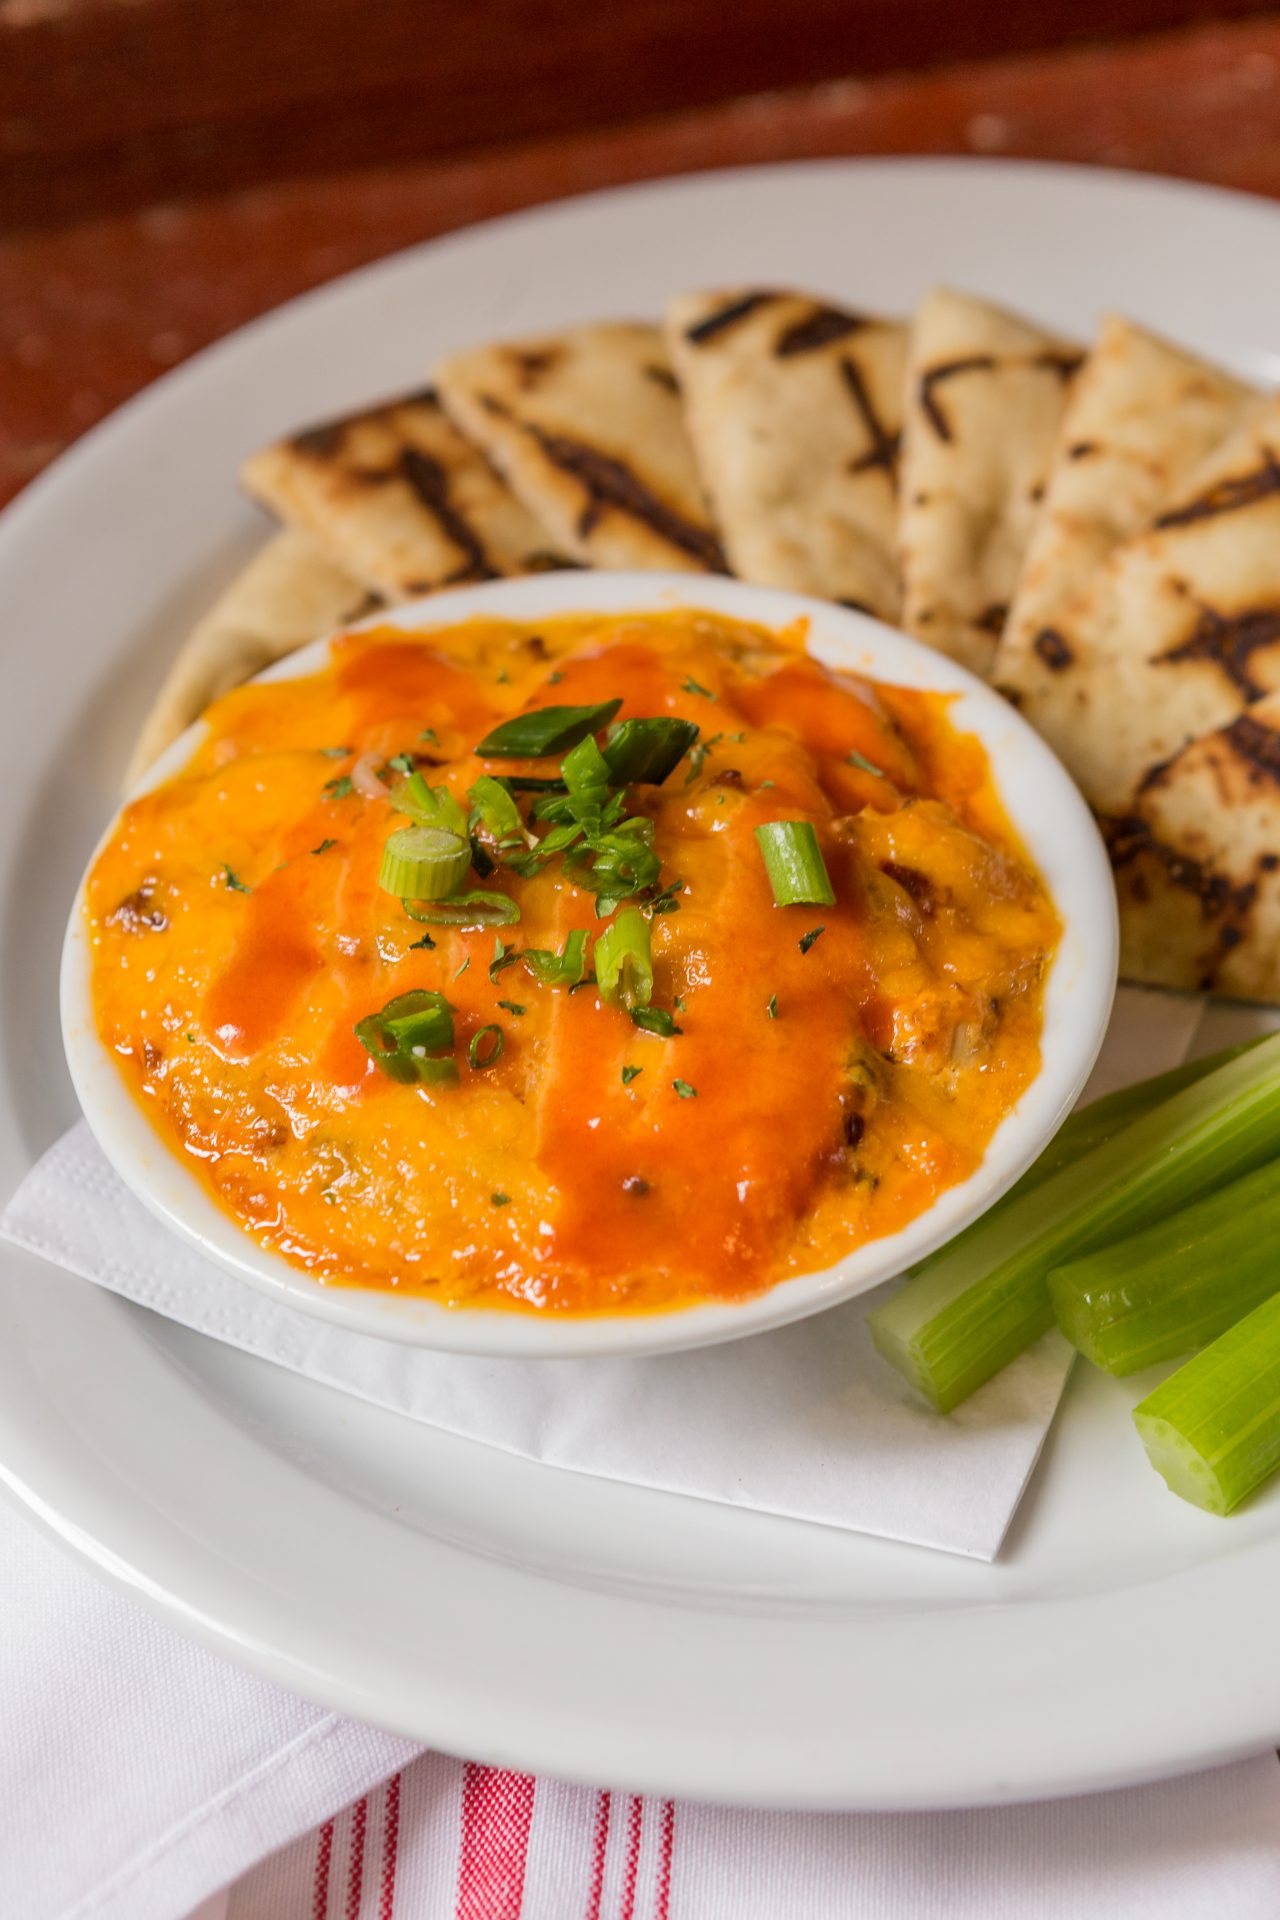 Image of Tailgate Buffalo Dip - Shredded Chicken, Blended Cheeses, Buffalo Sauce, Bleu Cheese Crumbles, Pita Chips, Celery, Carrots
